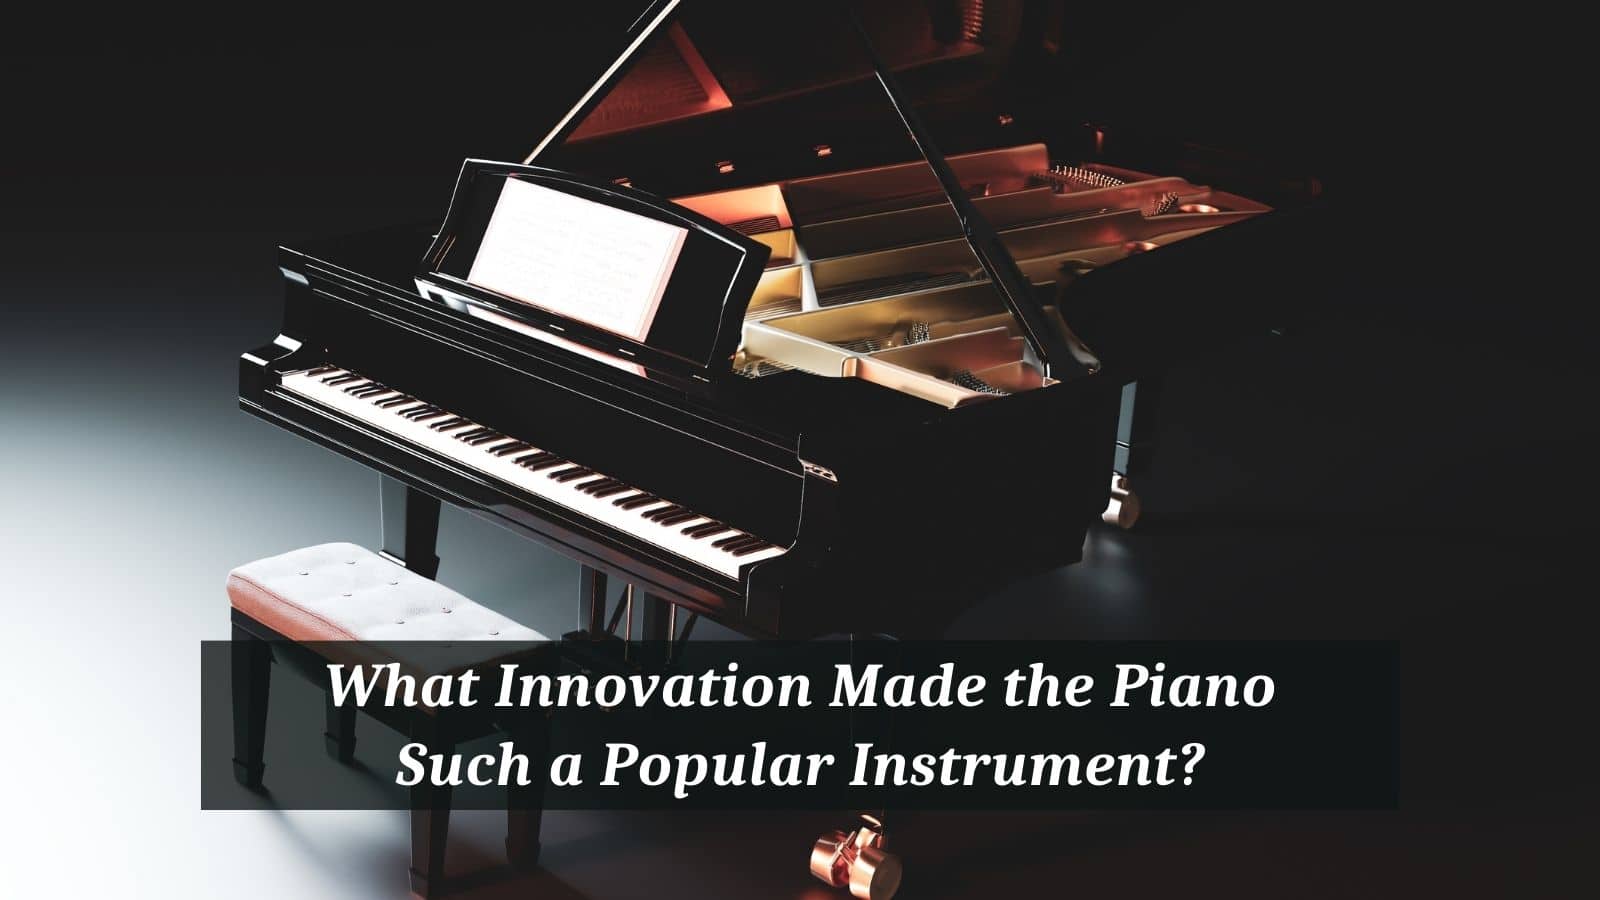 What Innovation Made the Piano Such a Popular Instrument